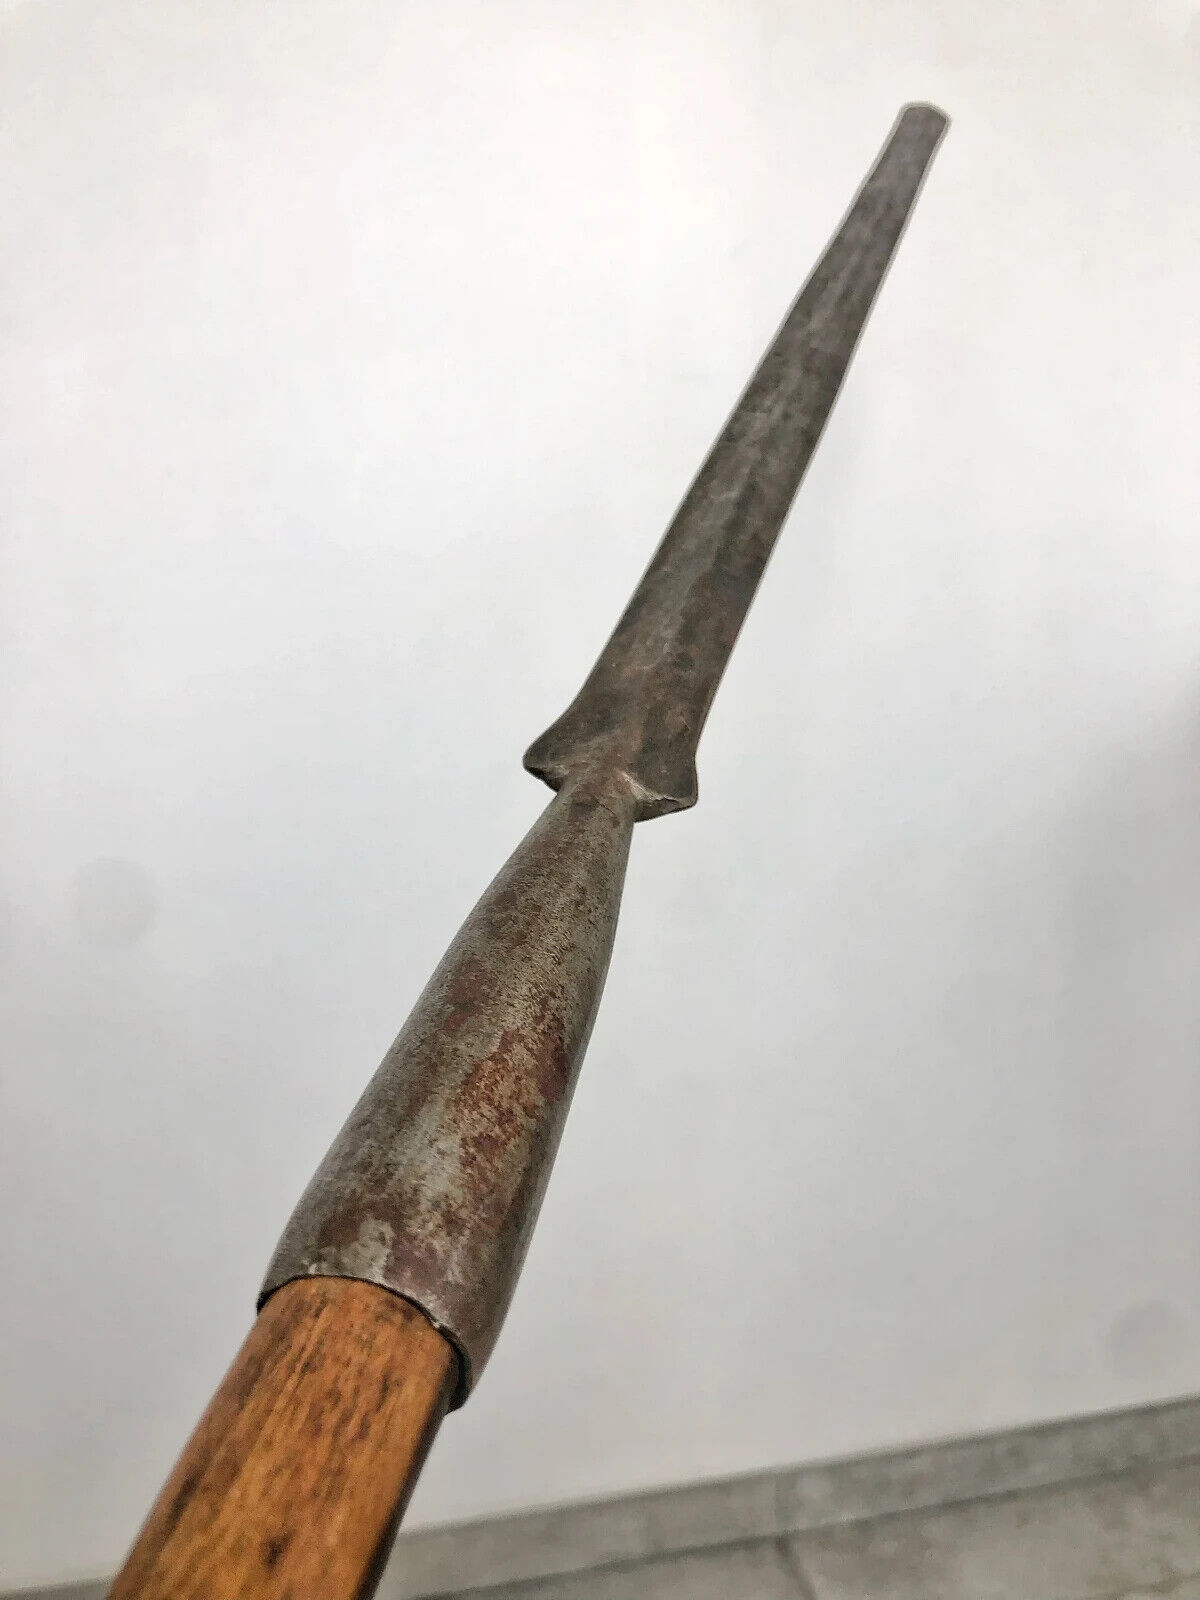 steel battle spear (early 1800s) made by hand, found in northern France (42in)